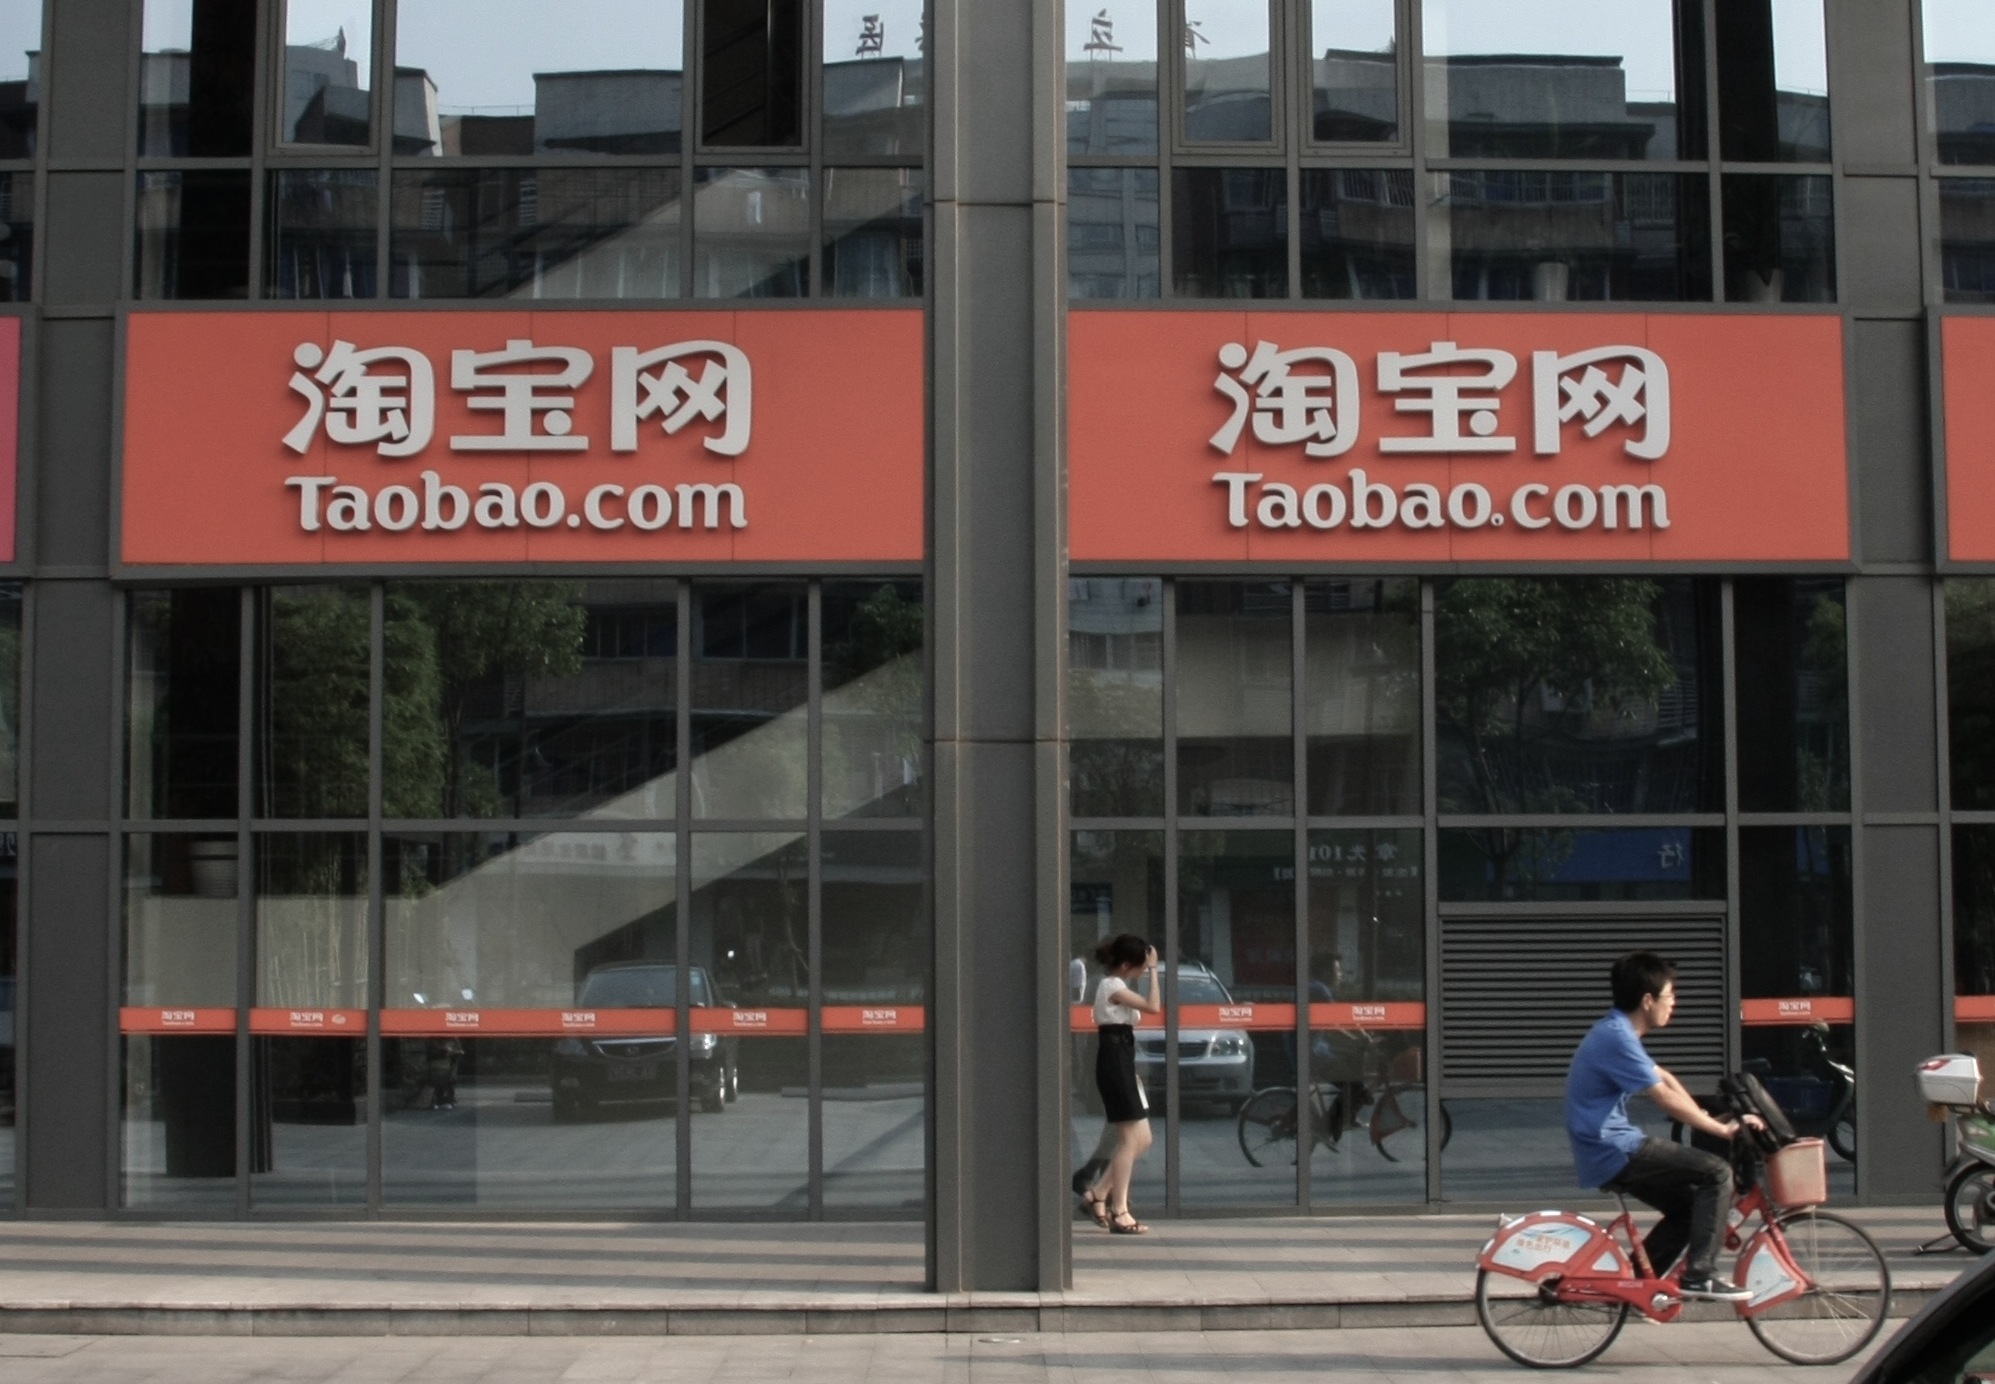 What India can learn from success story of Alibaba-owned marketplace Taobao